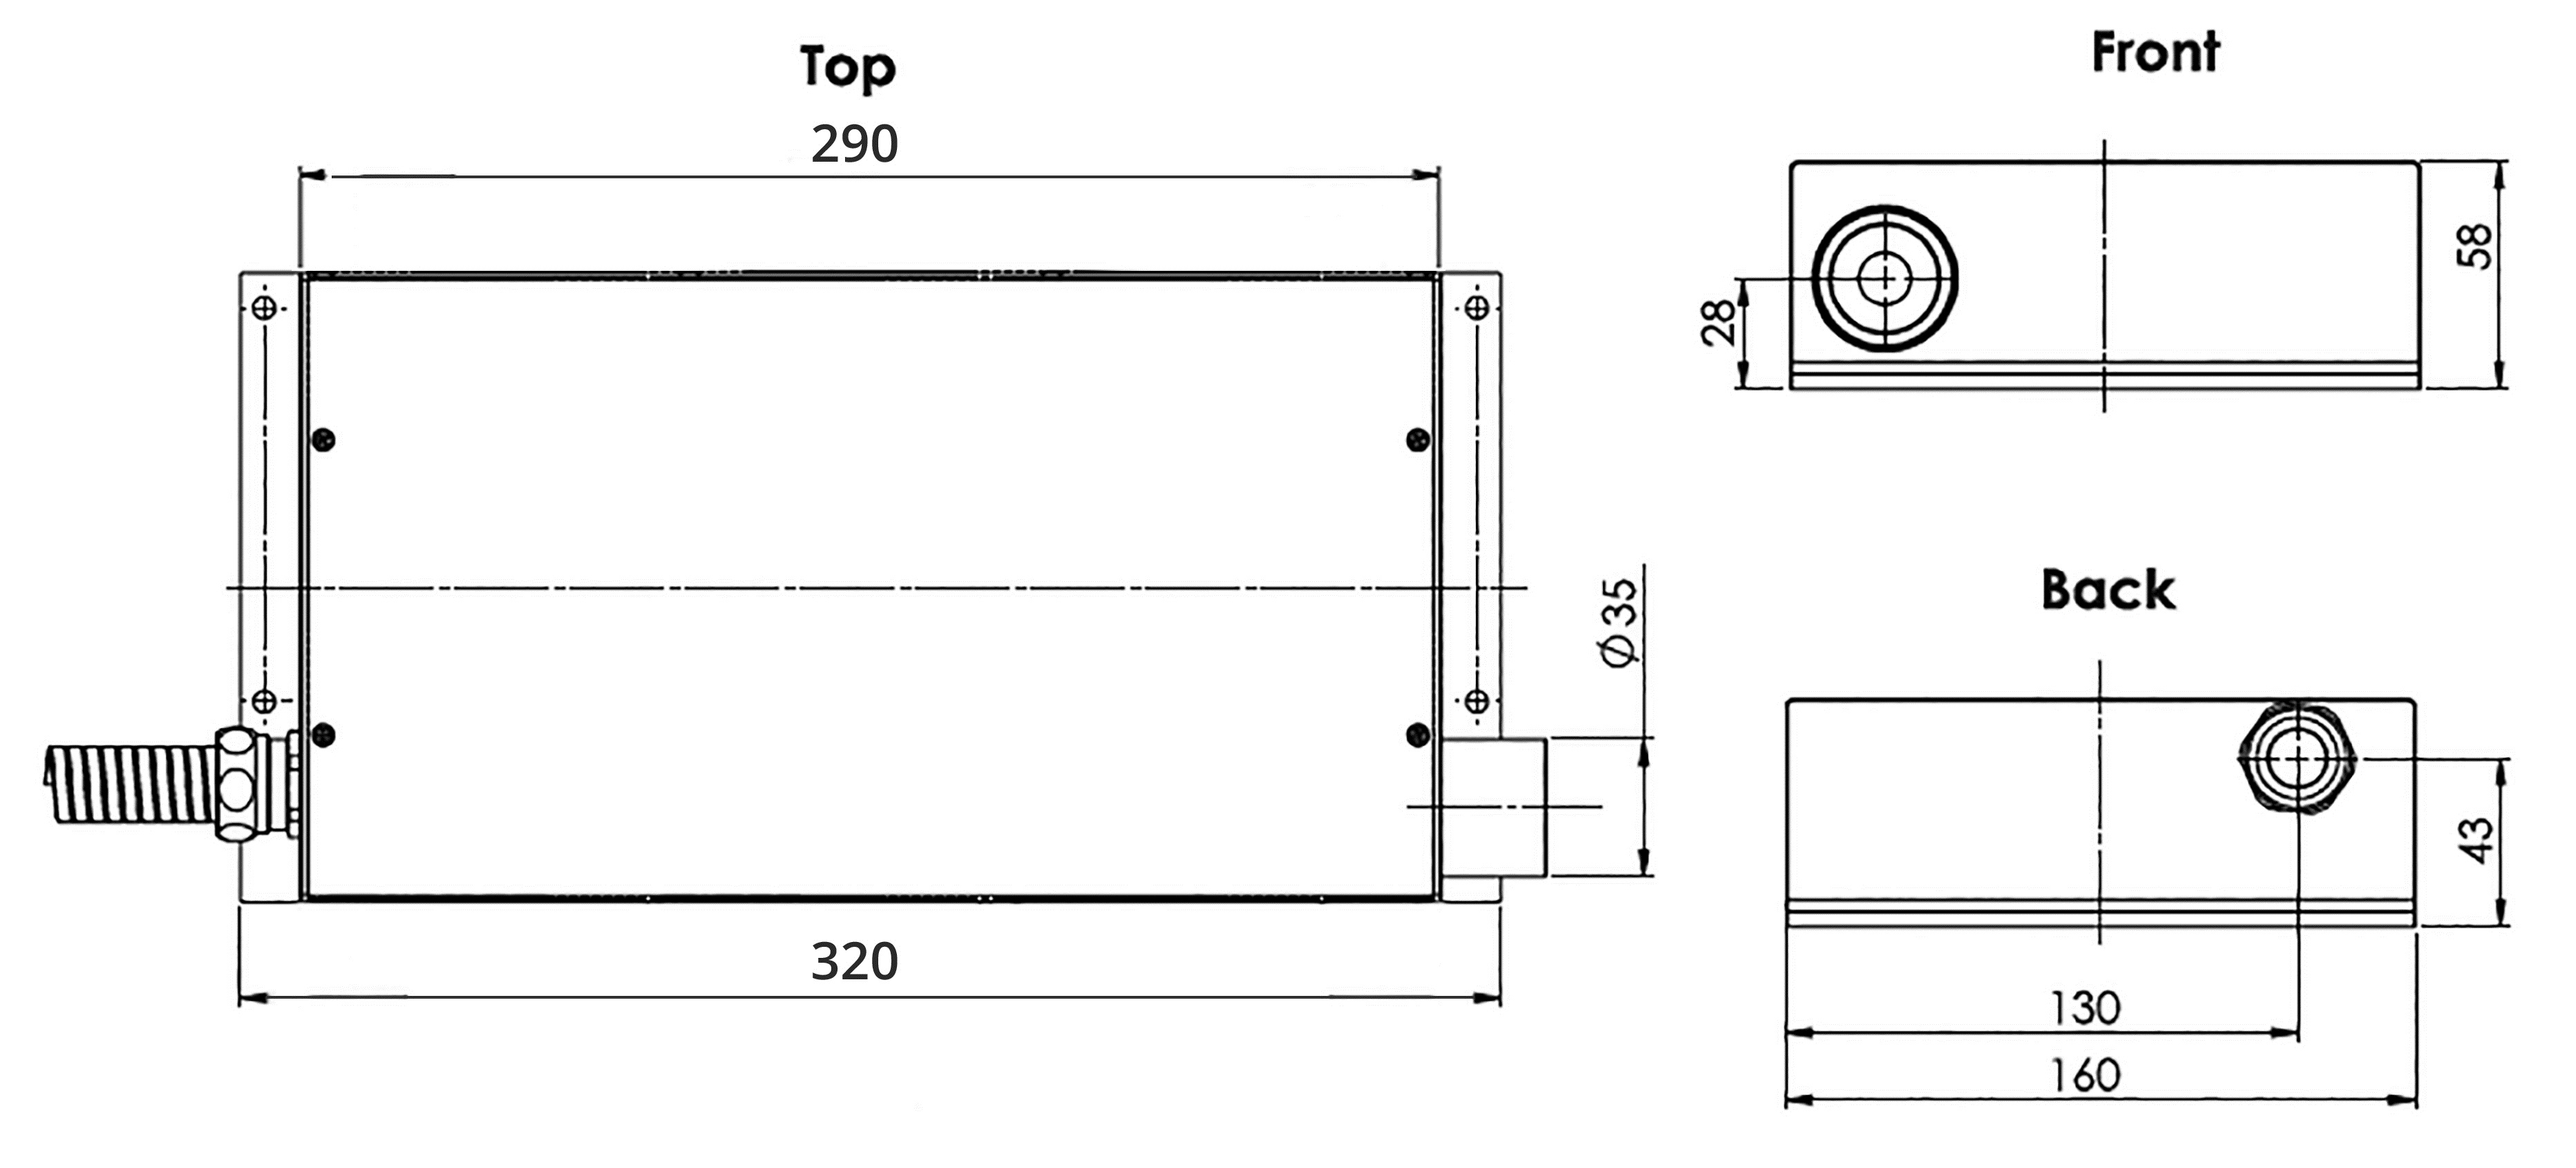 YLPP 150 ps remote amplifier drawing